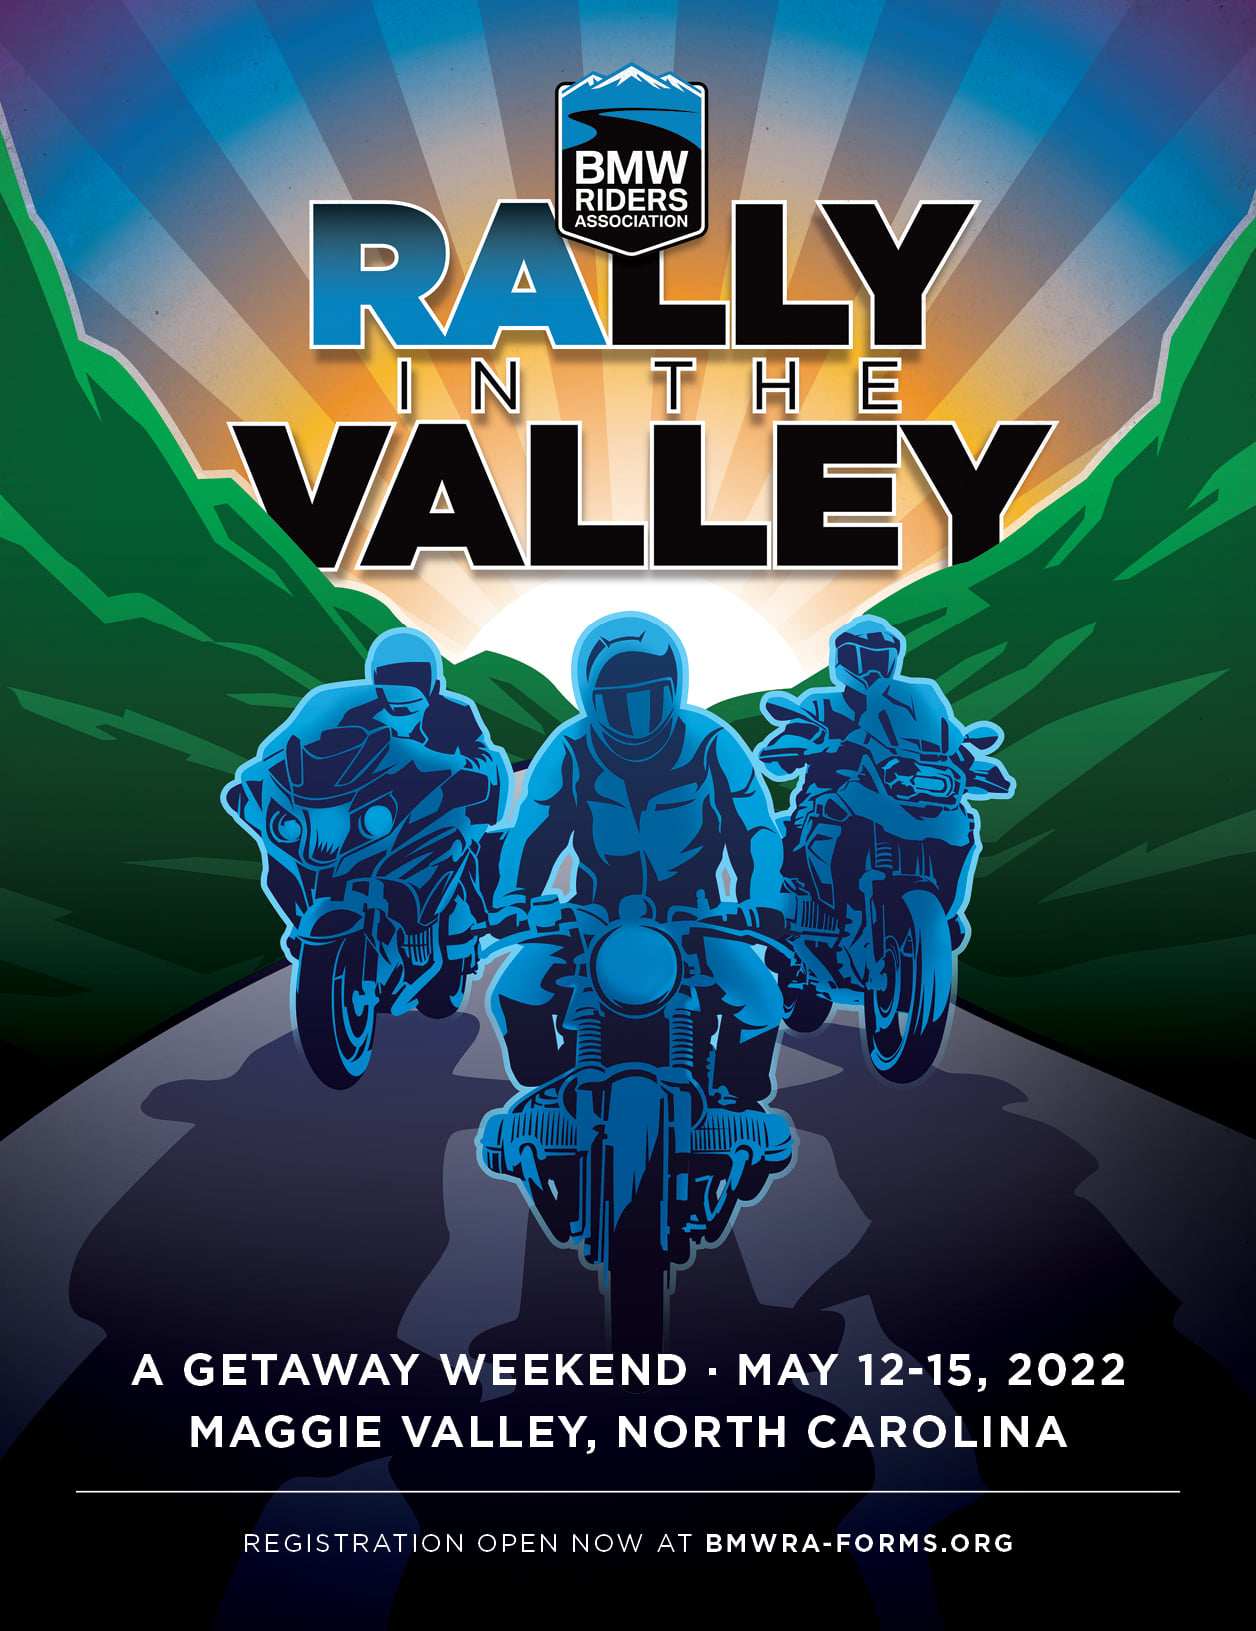 Rally in the Valley - BMW Riders Association